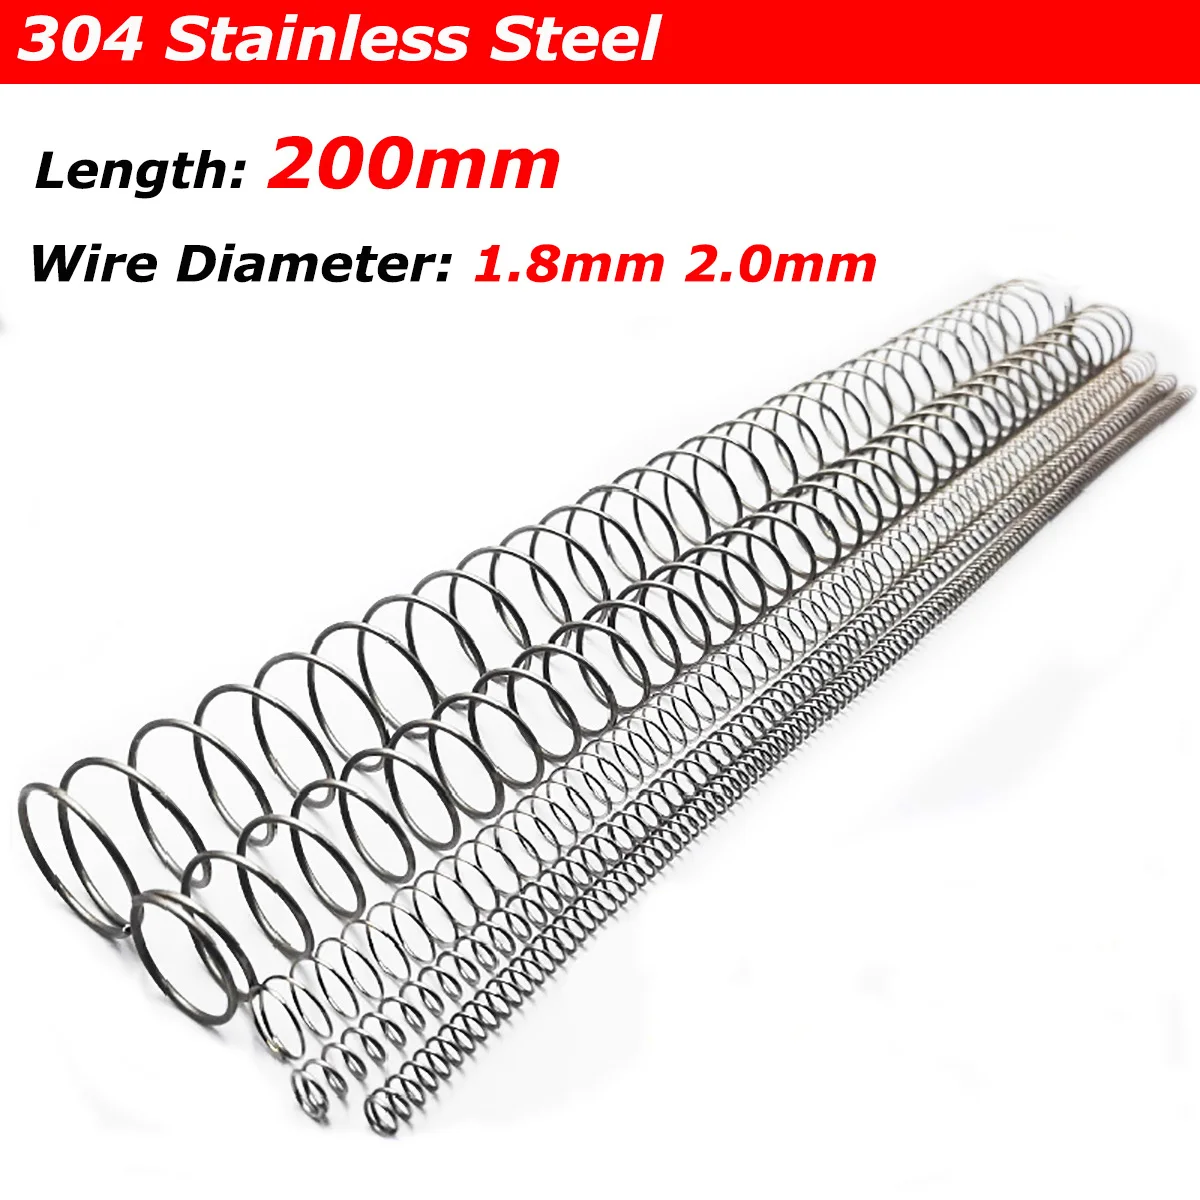 

304 Stainless Steel Compression Spring Return Spring Wire Diameter 1.8mm 2.0mm Length 200mm Y-type Coil Pressure Springs